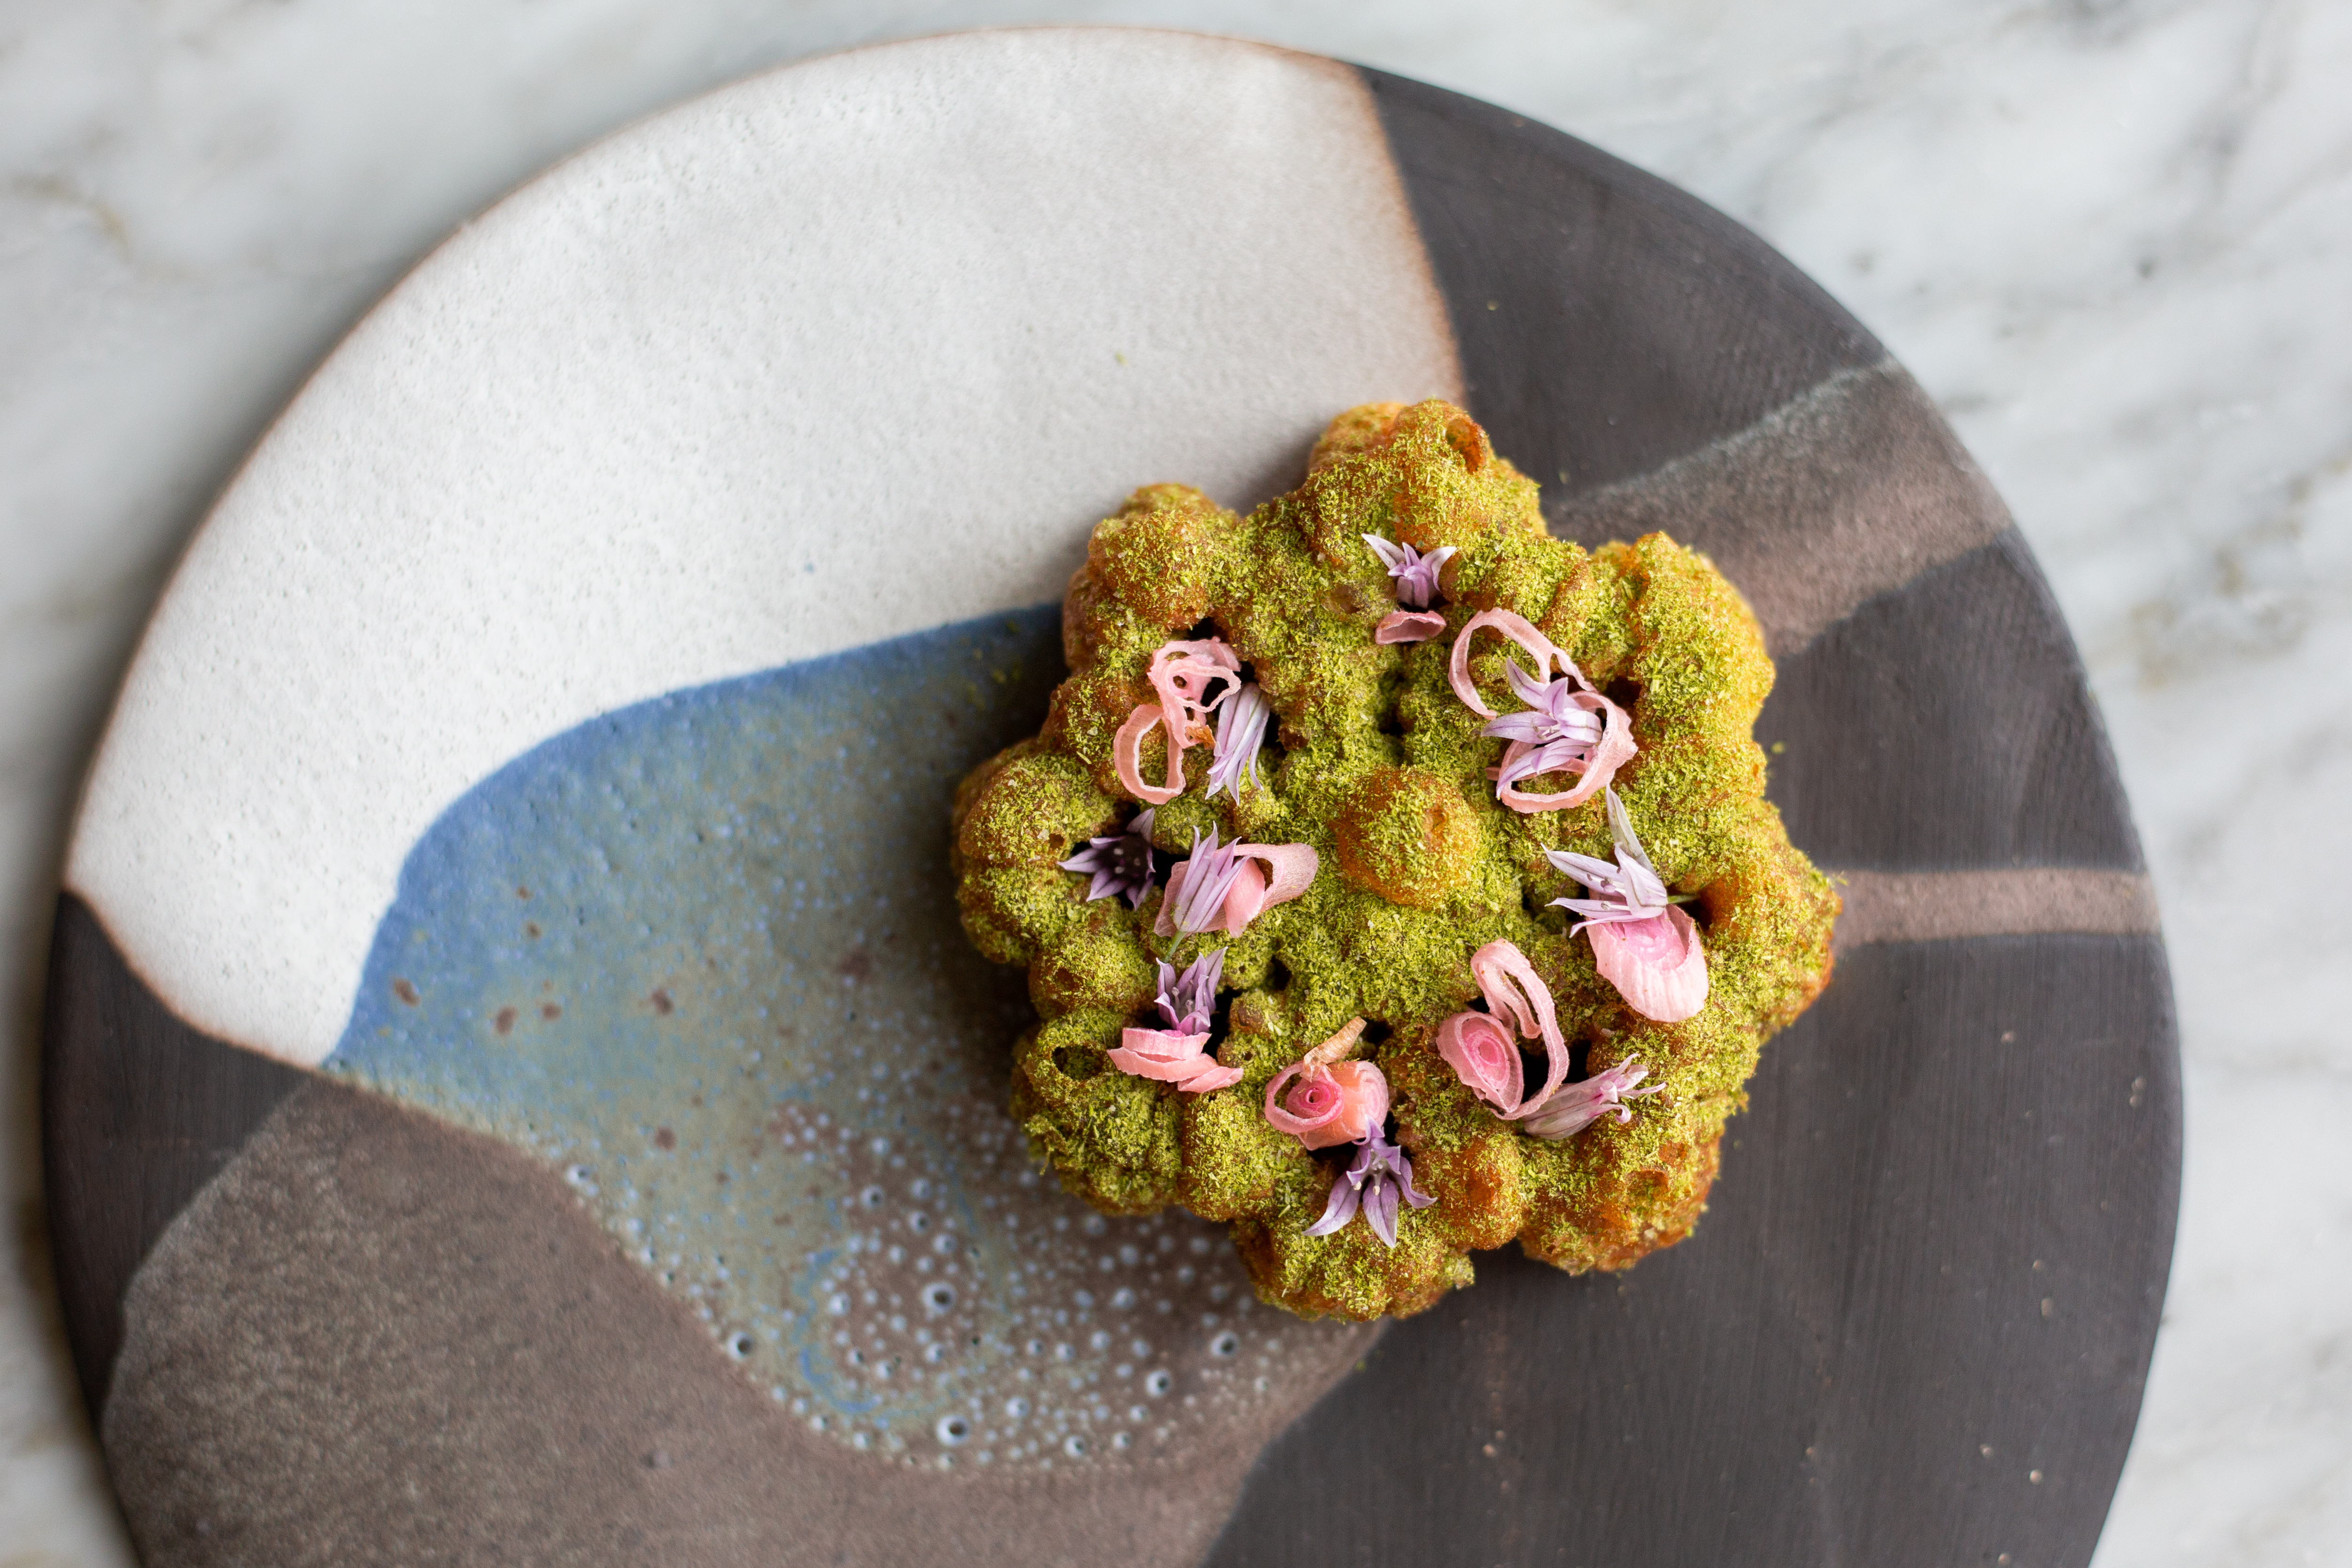 A cookie dusted with green dust and flower petals artfully plated.